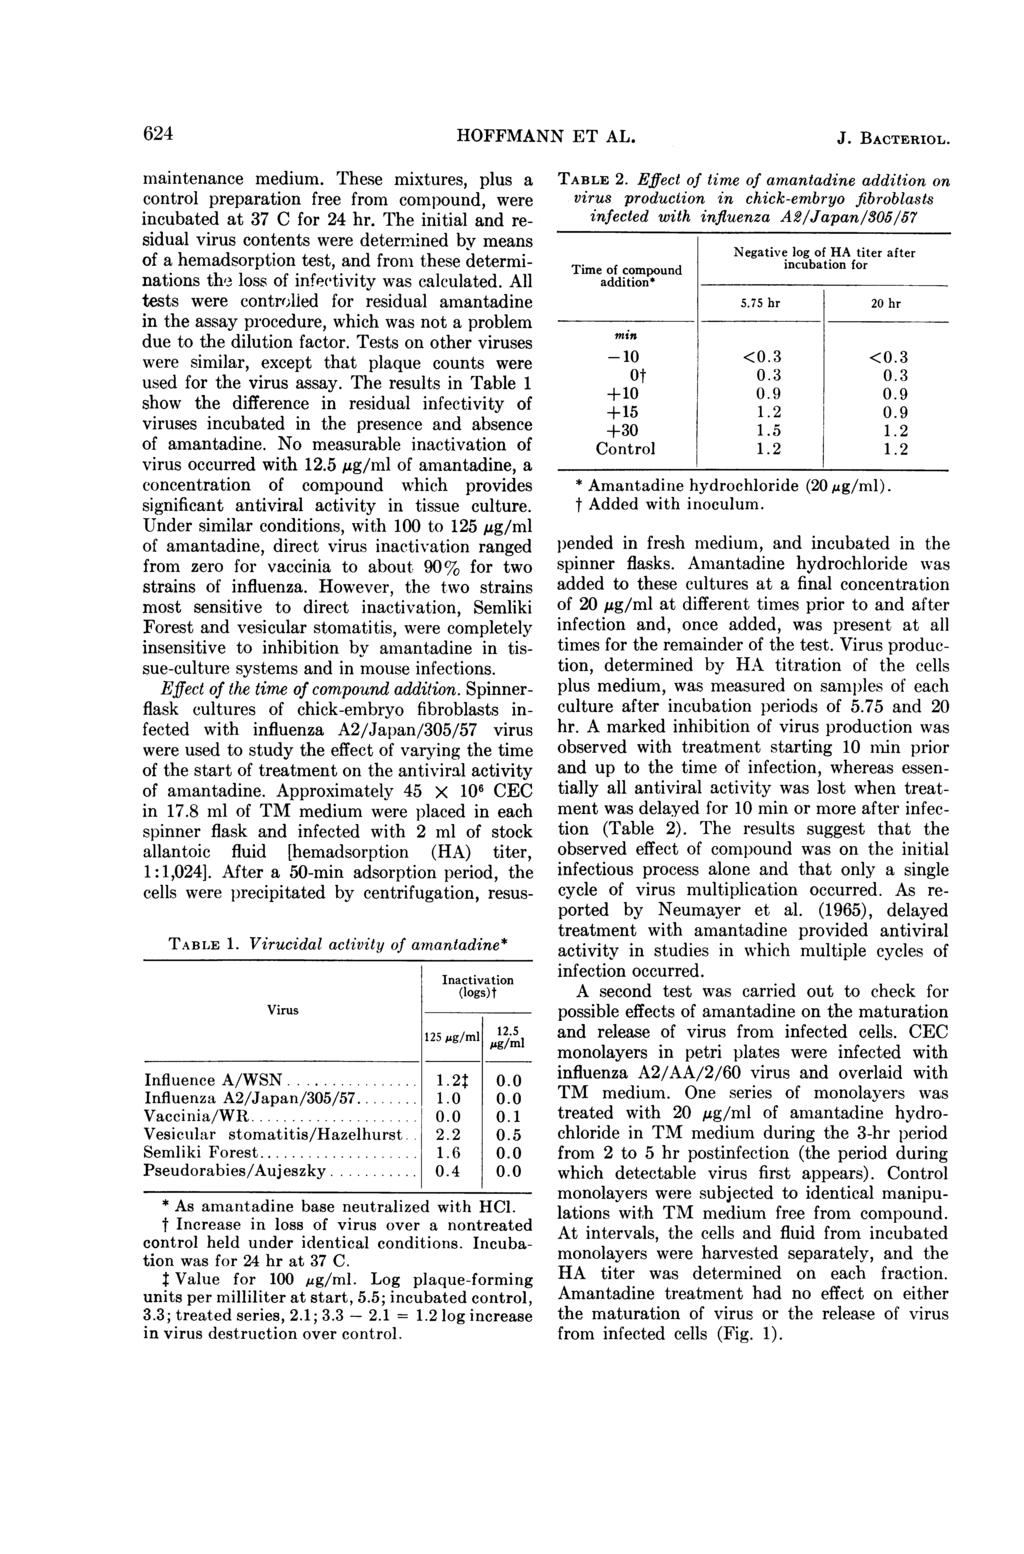 624 HOFFMANN ET AL. J. BACTERIOL. maintenance medium. These mixtures, plus a control preparation free from compound, were incubated at 37 C for 24 hr.